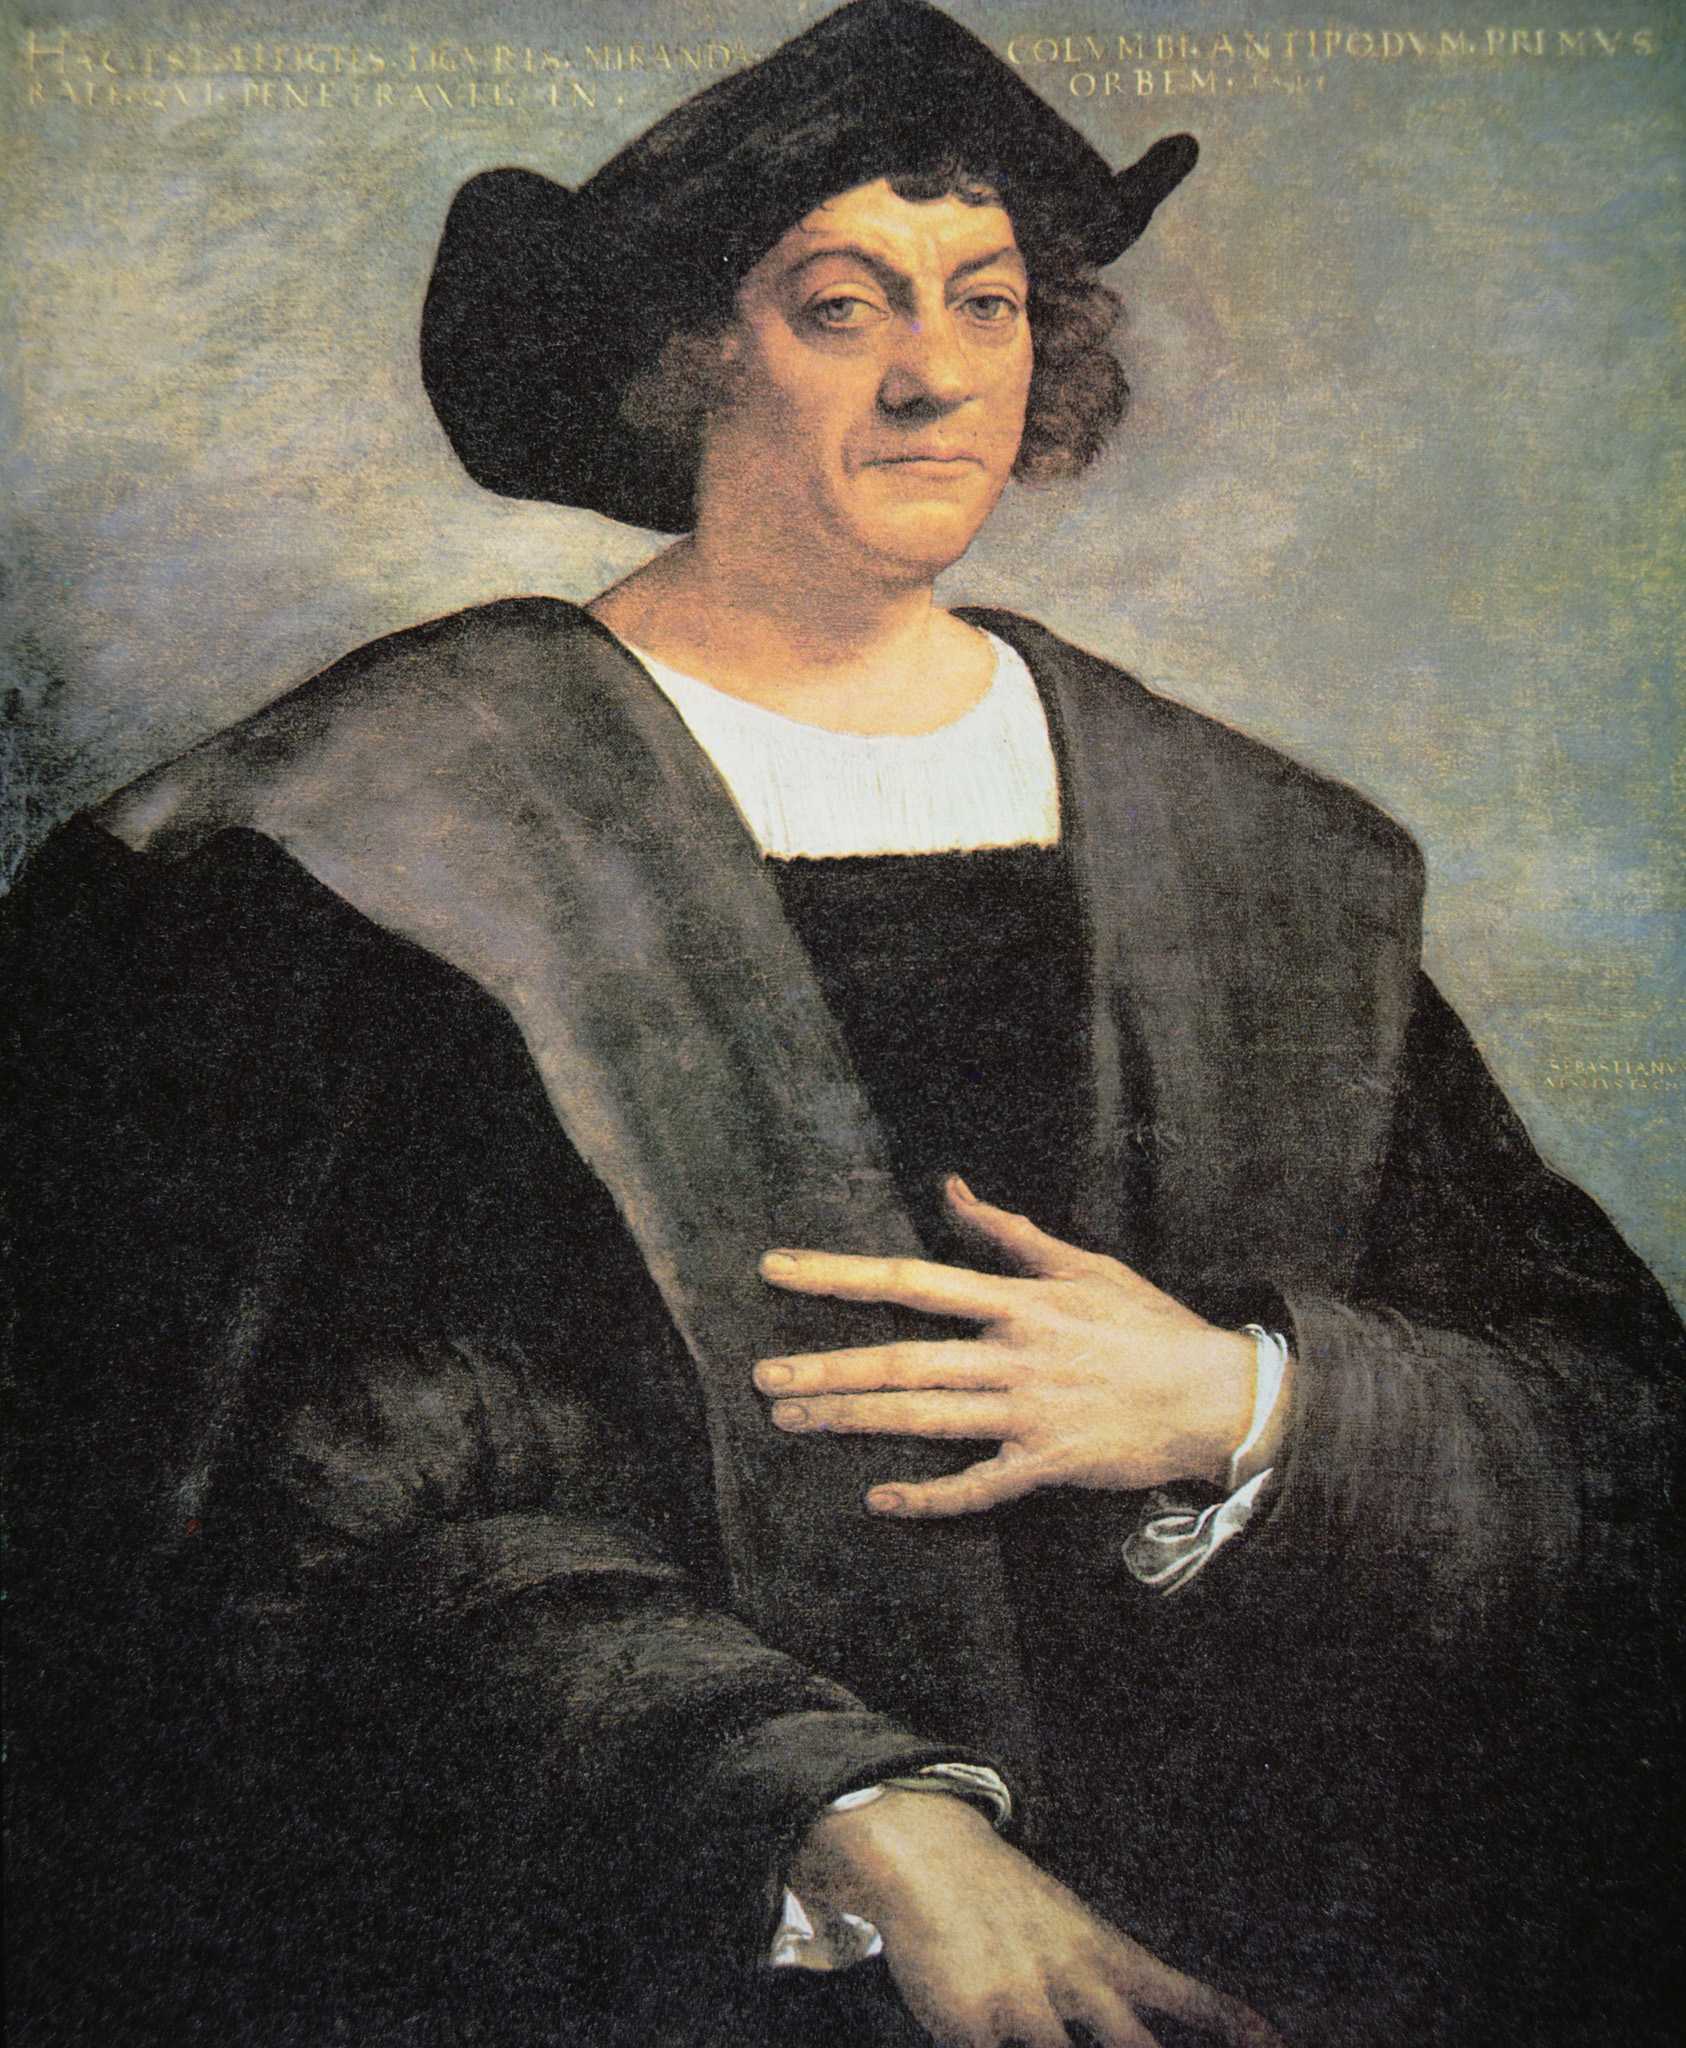 A painted portrait of Christopher Columbus who is dressed in all black. Against a grey sky, he stands with a hand pressed against his chest.